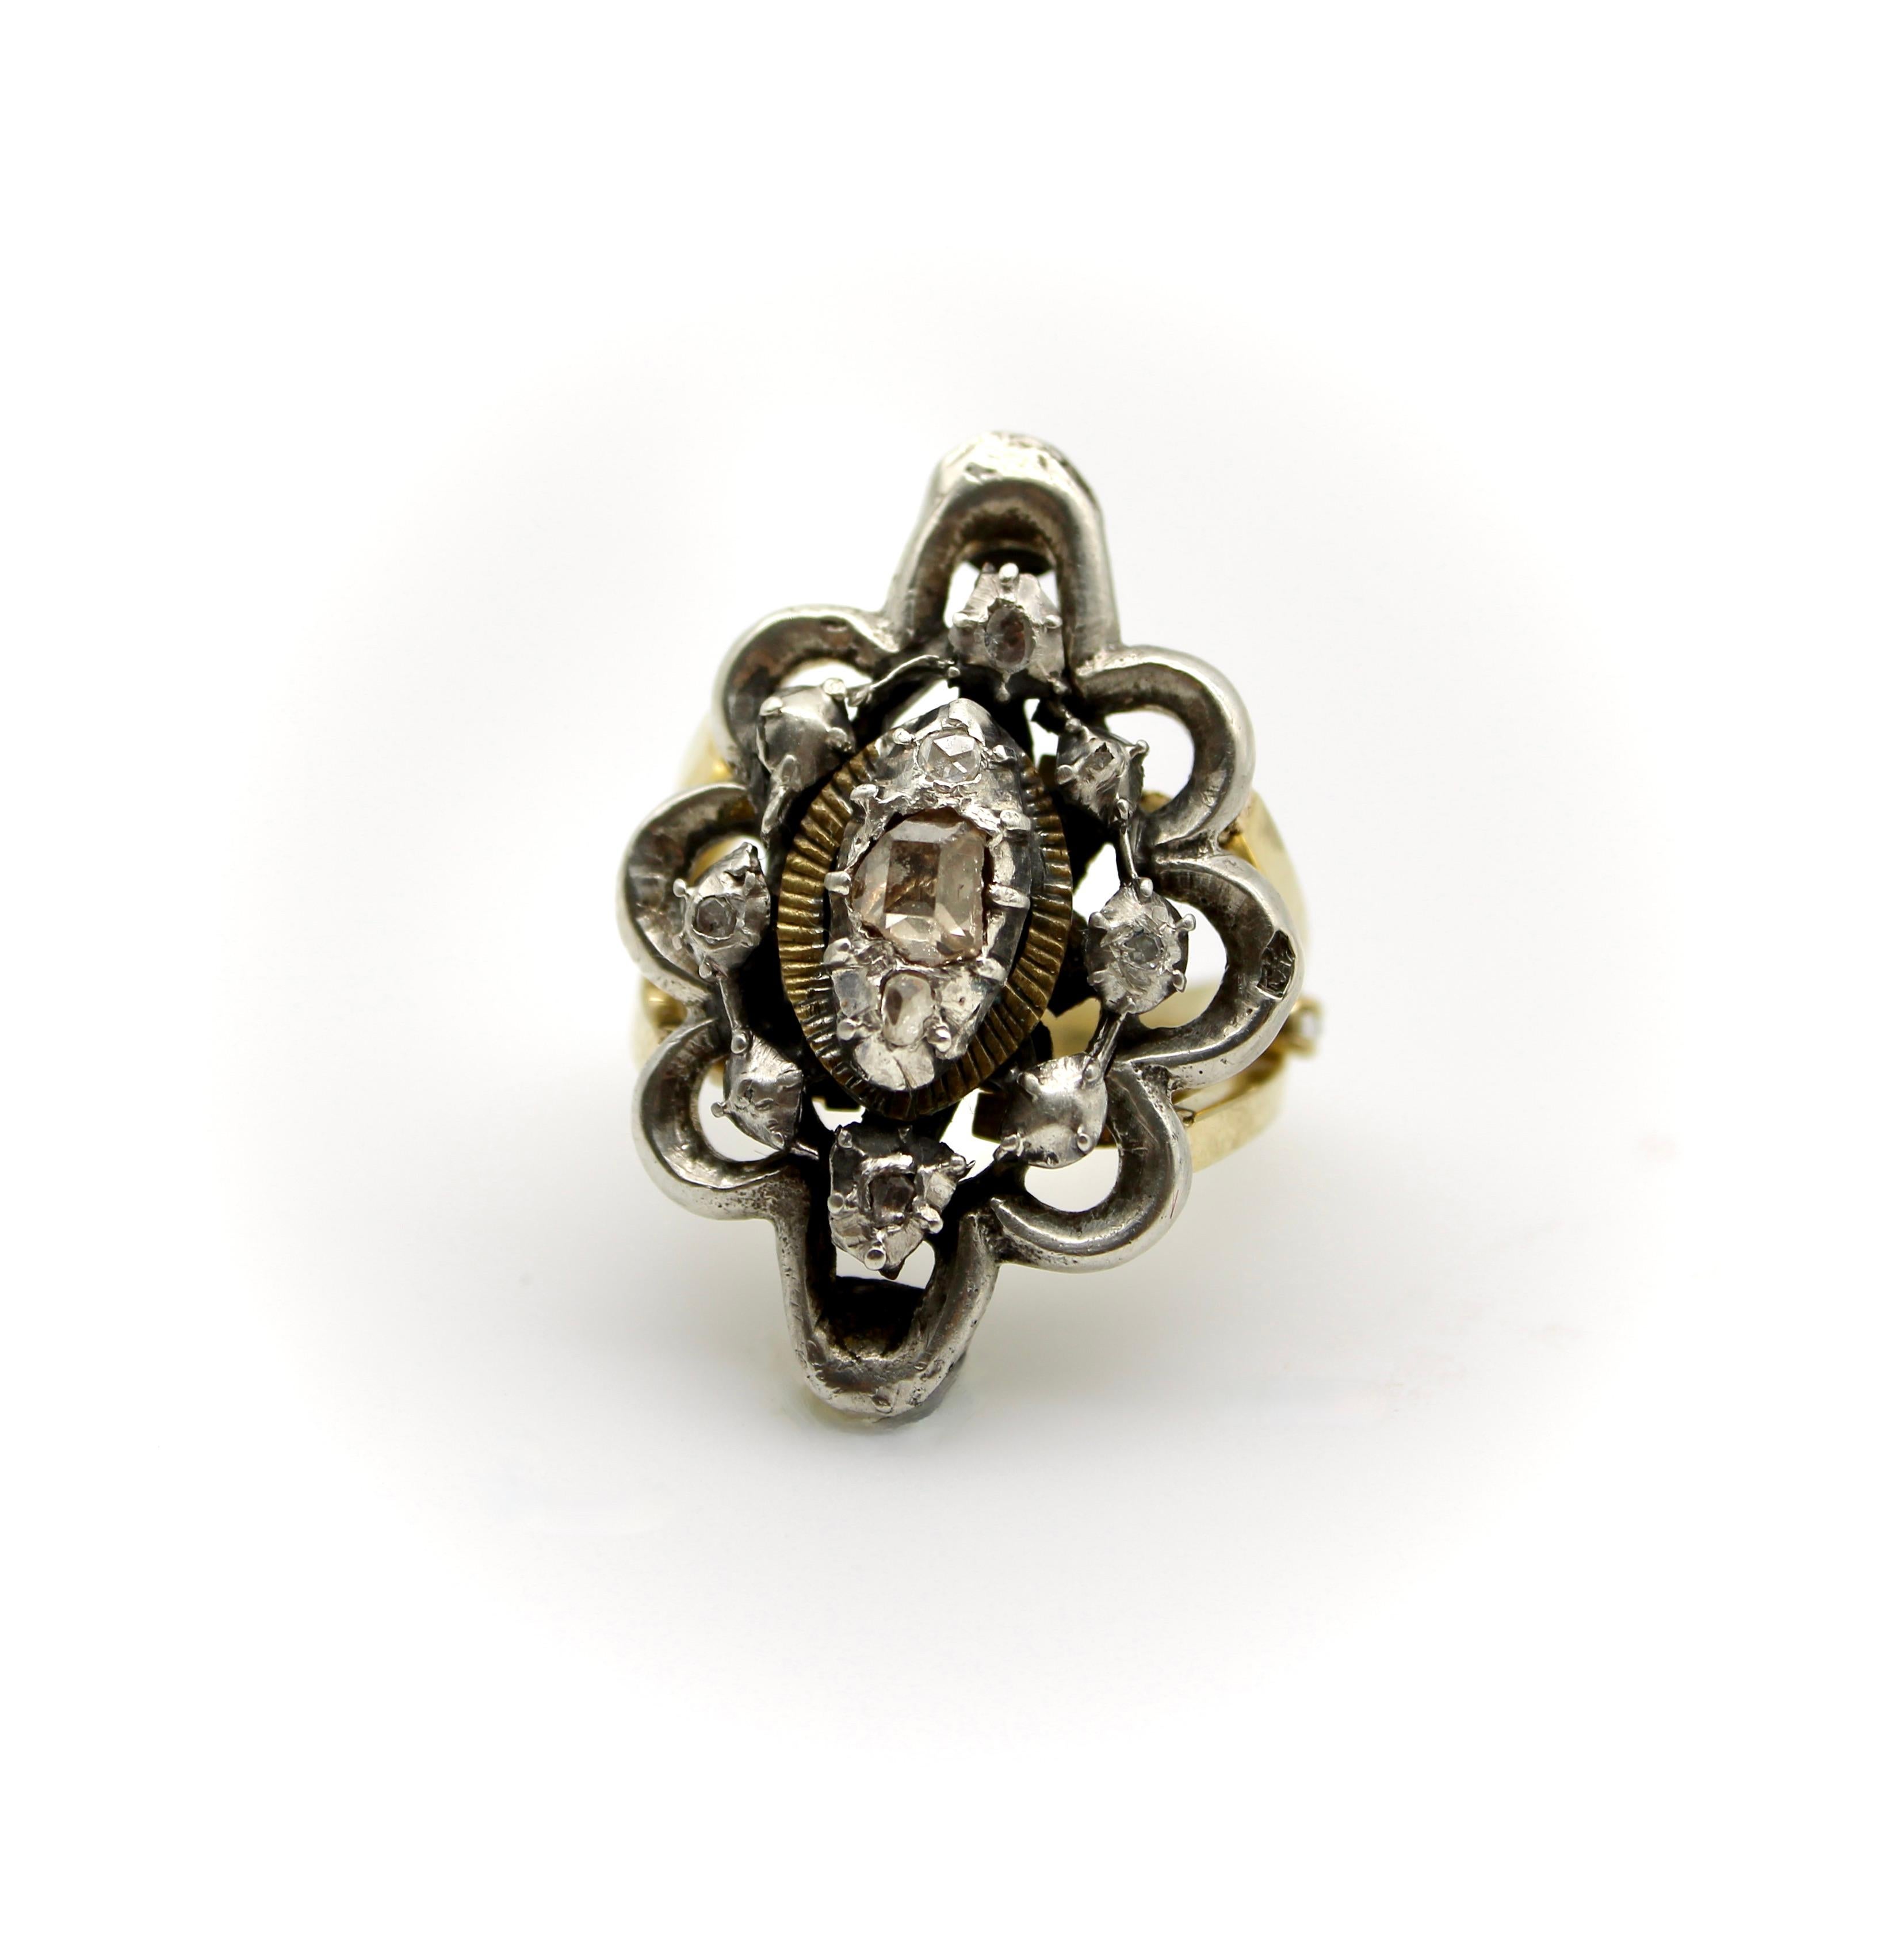 This exquisite ring has a Georgian Revival sterling silver diamond flower top, with a custom made 14k yellow gold band. The sterling silver flower has a beautiful table cut (flat top) diamond that is collect set in the center of the ring. Around the